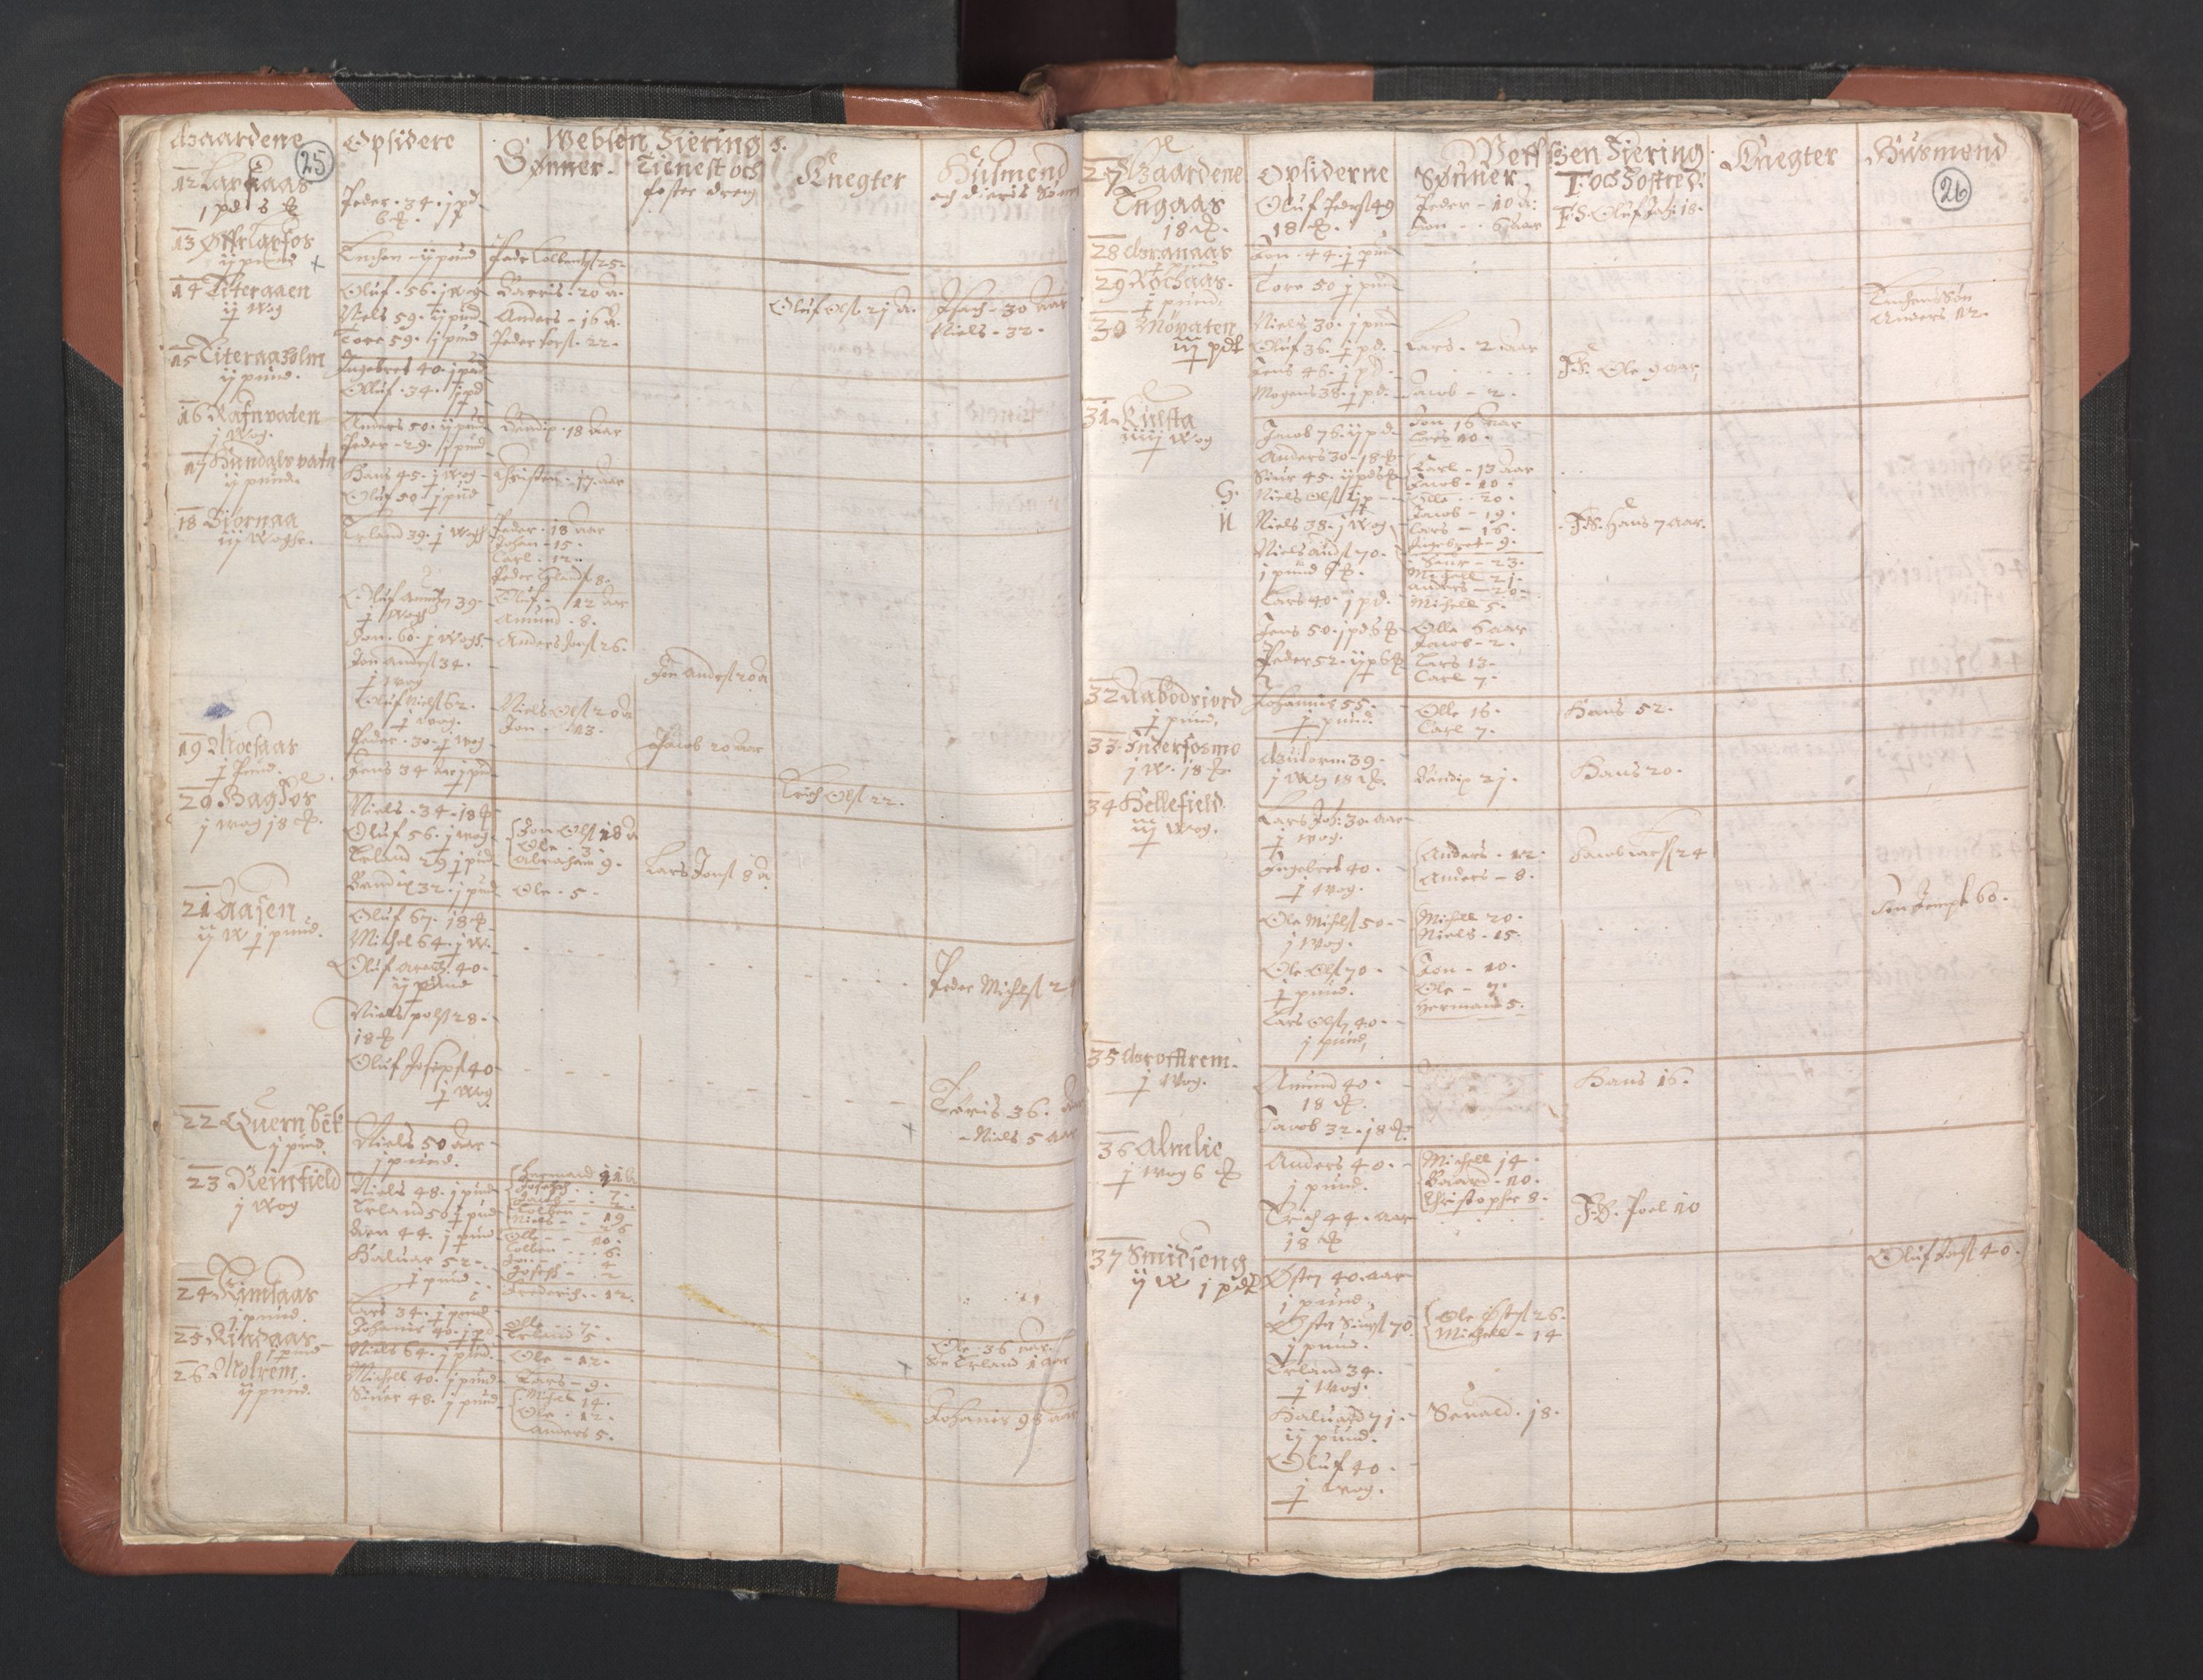 RA, Vicar's Census 1664-1666, no. 35: Helgeland deanery and Salten deanery, 1664-1666, p. 25-26